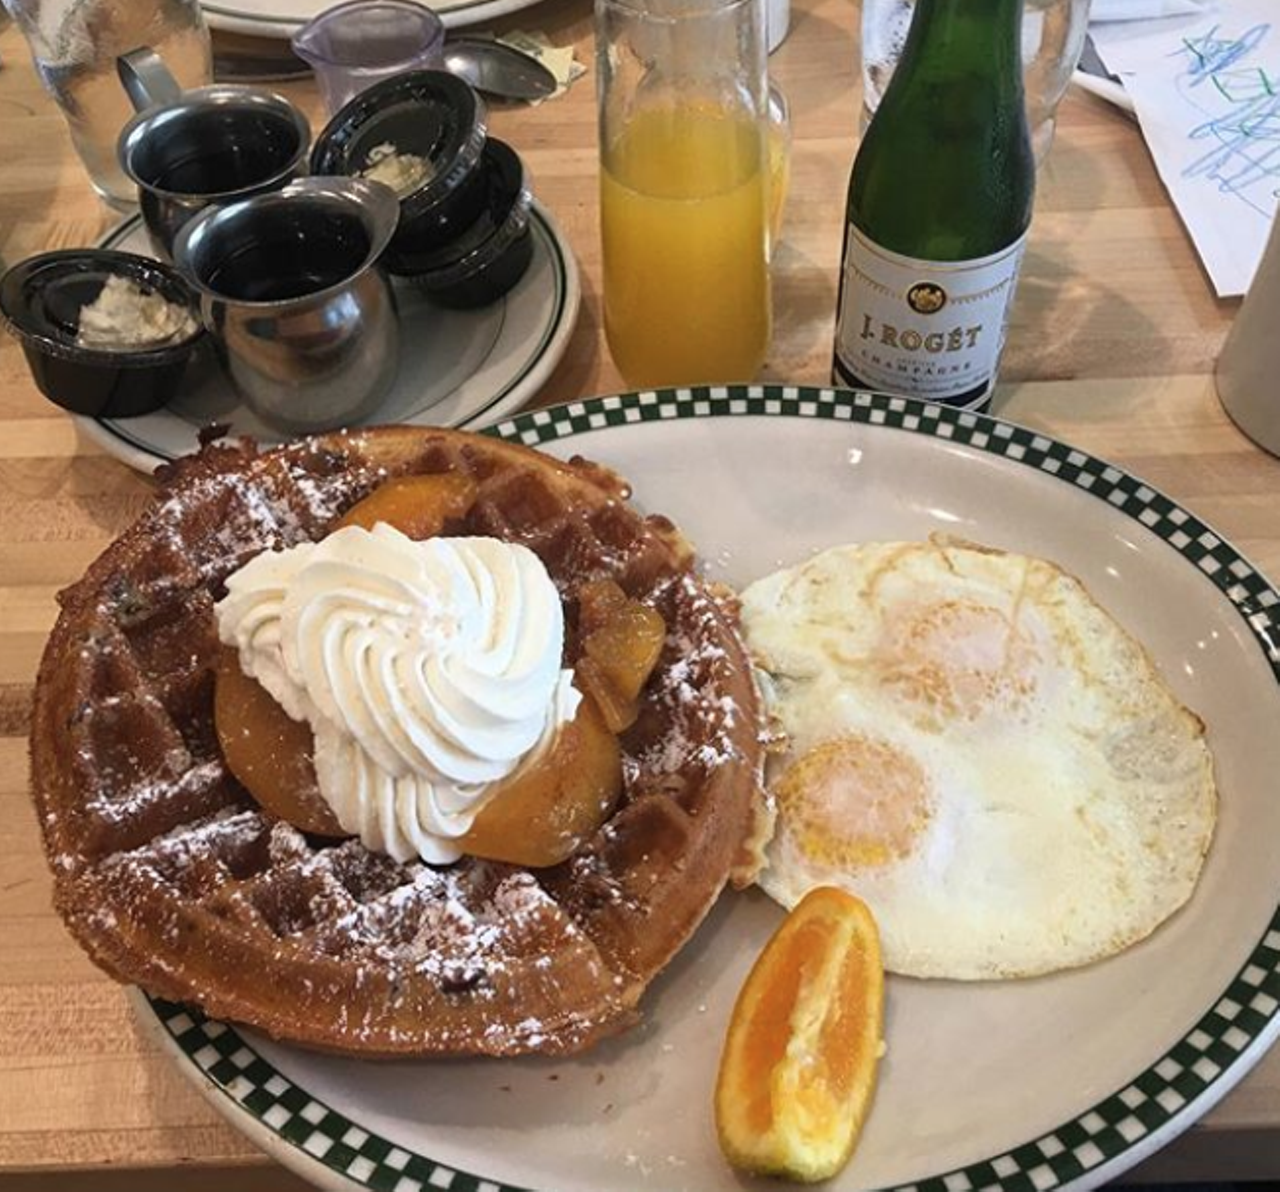 Magnolia Pancake Haus
Multiple locations, magnoliapancakehaus.com
You’re guaranteed to have a long wait if you stop for brunch, but this 7am-2pm eatery is worth it. Enjoy the usual breakfast staples, but be sure to try the corned beef hash, banana’s foster French toast or lemon poppyseed waffle.
Photo via Instagram / gcarrizales